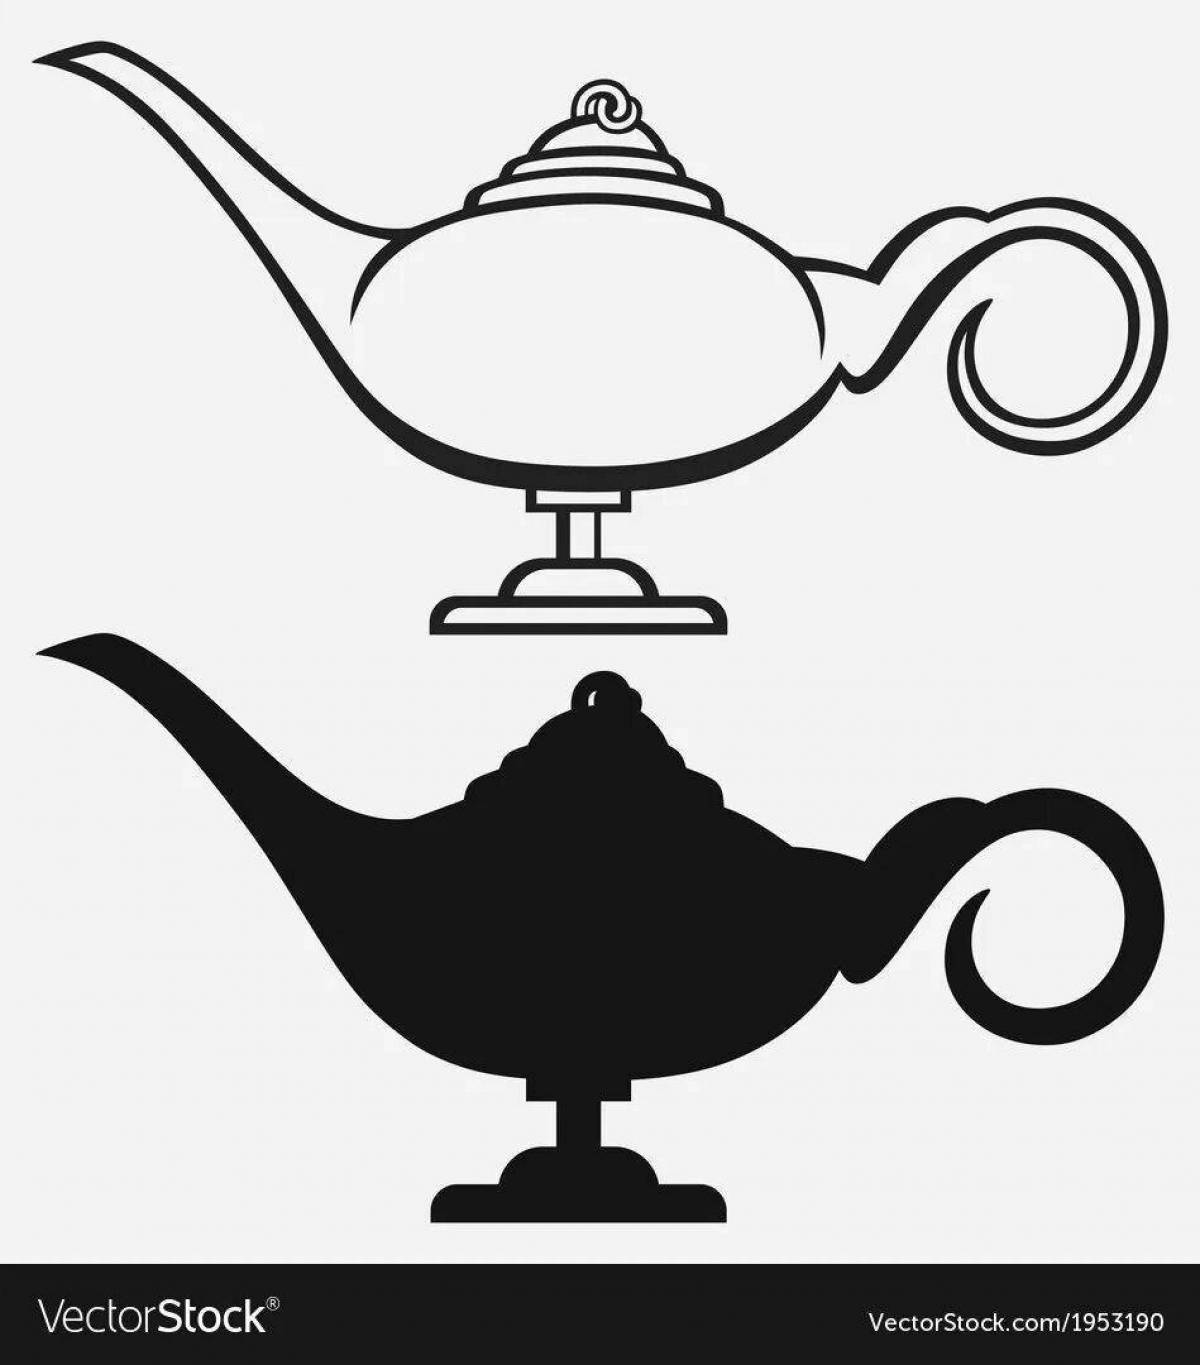 Aladdin's dazzling lamp coloring page